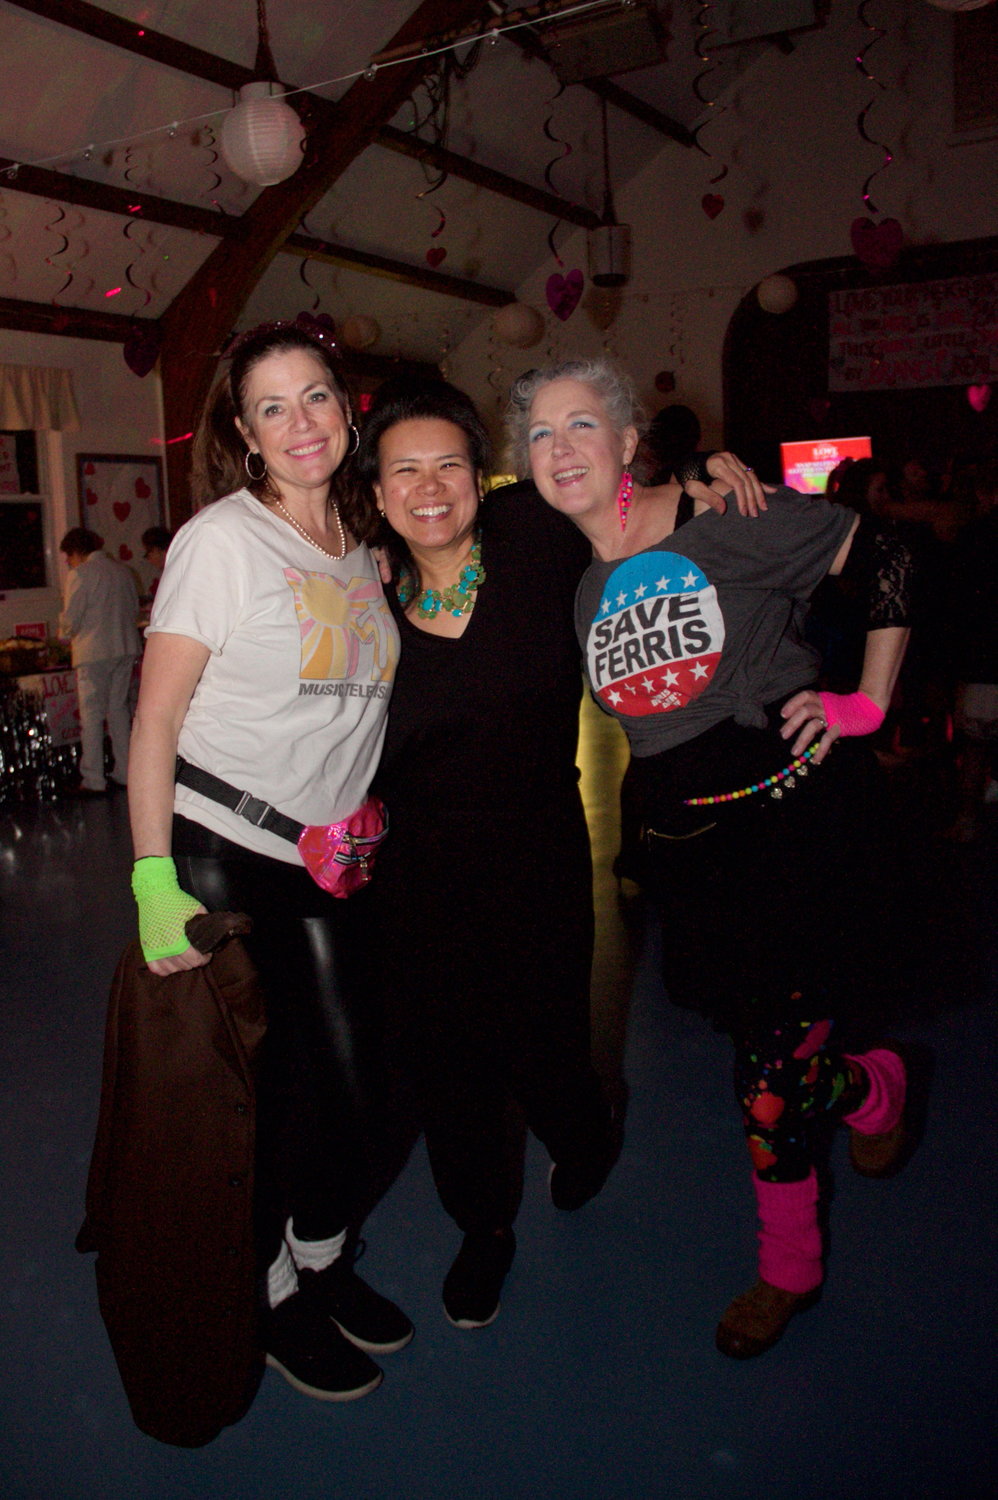 Some attendees went for a look that was more ‘80’s punk than 80’s prom, like Faith Keenan, left, Nan Bischoff and Karen Buschfrers.